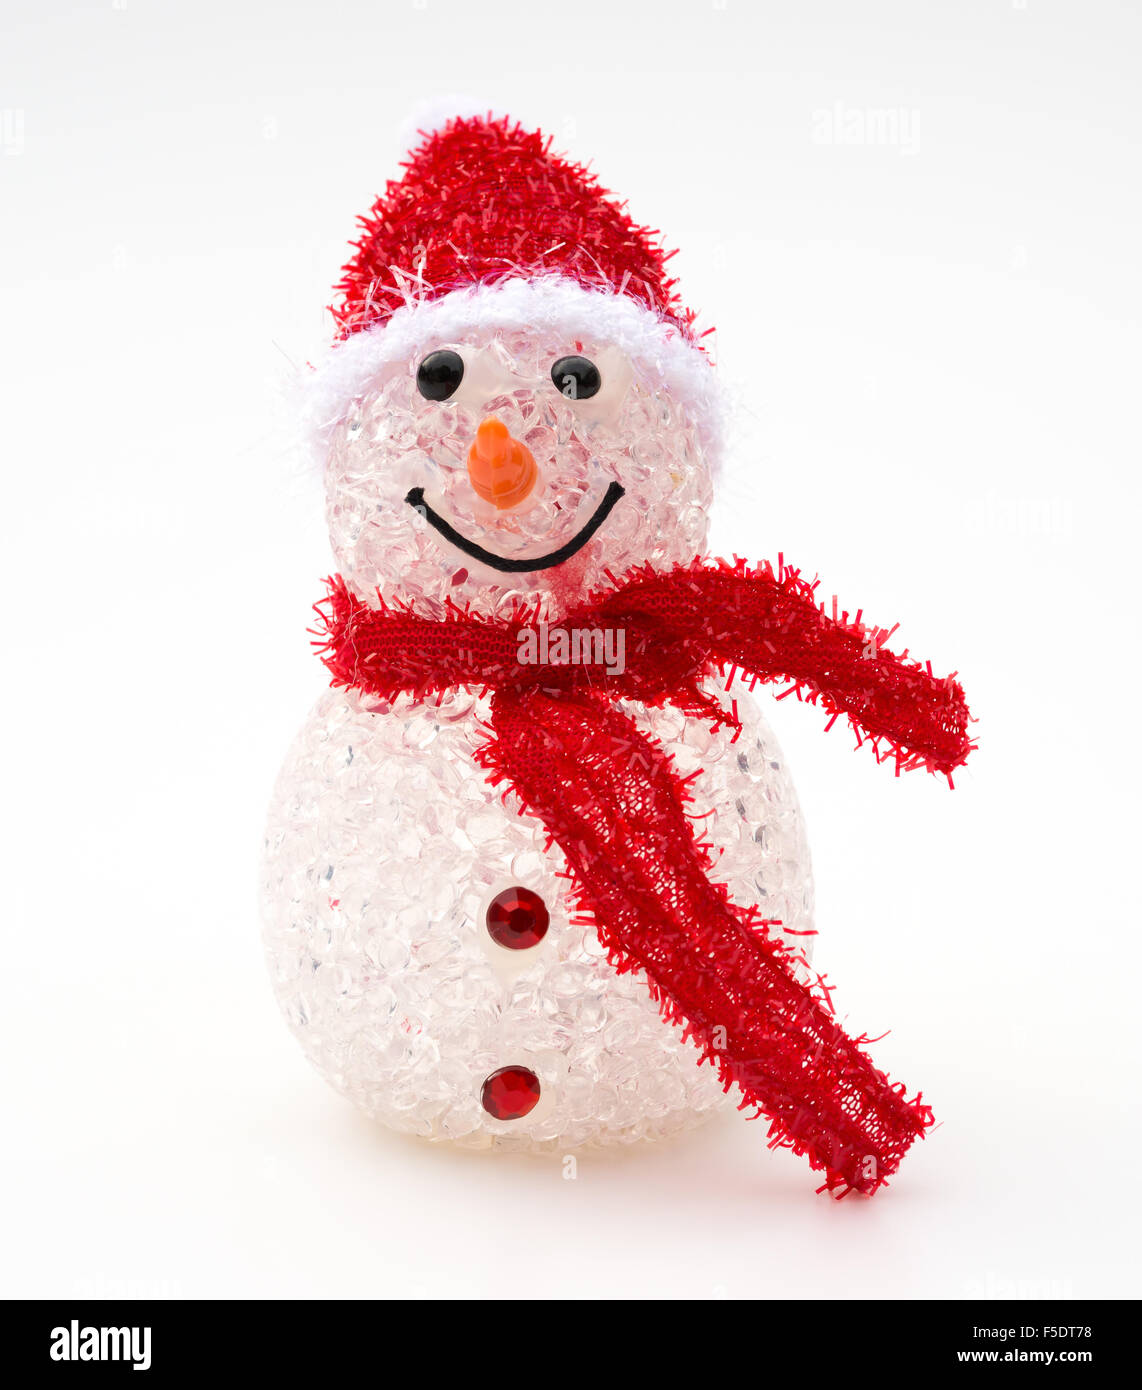 smiling toy christmas snowman with red scarf Stock Photo